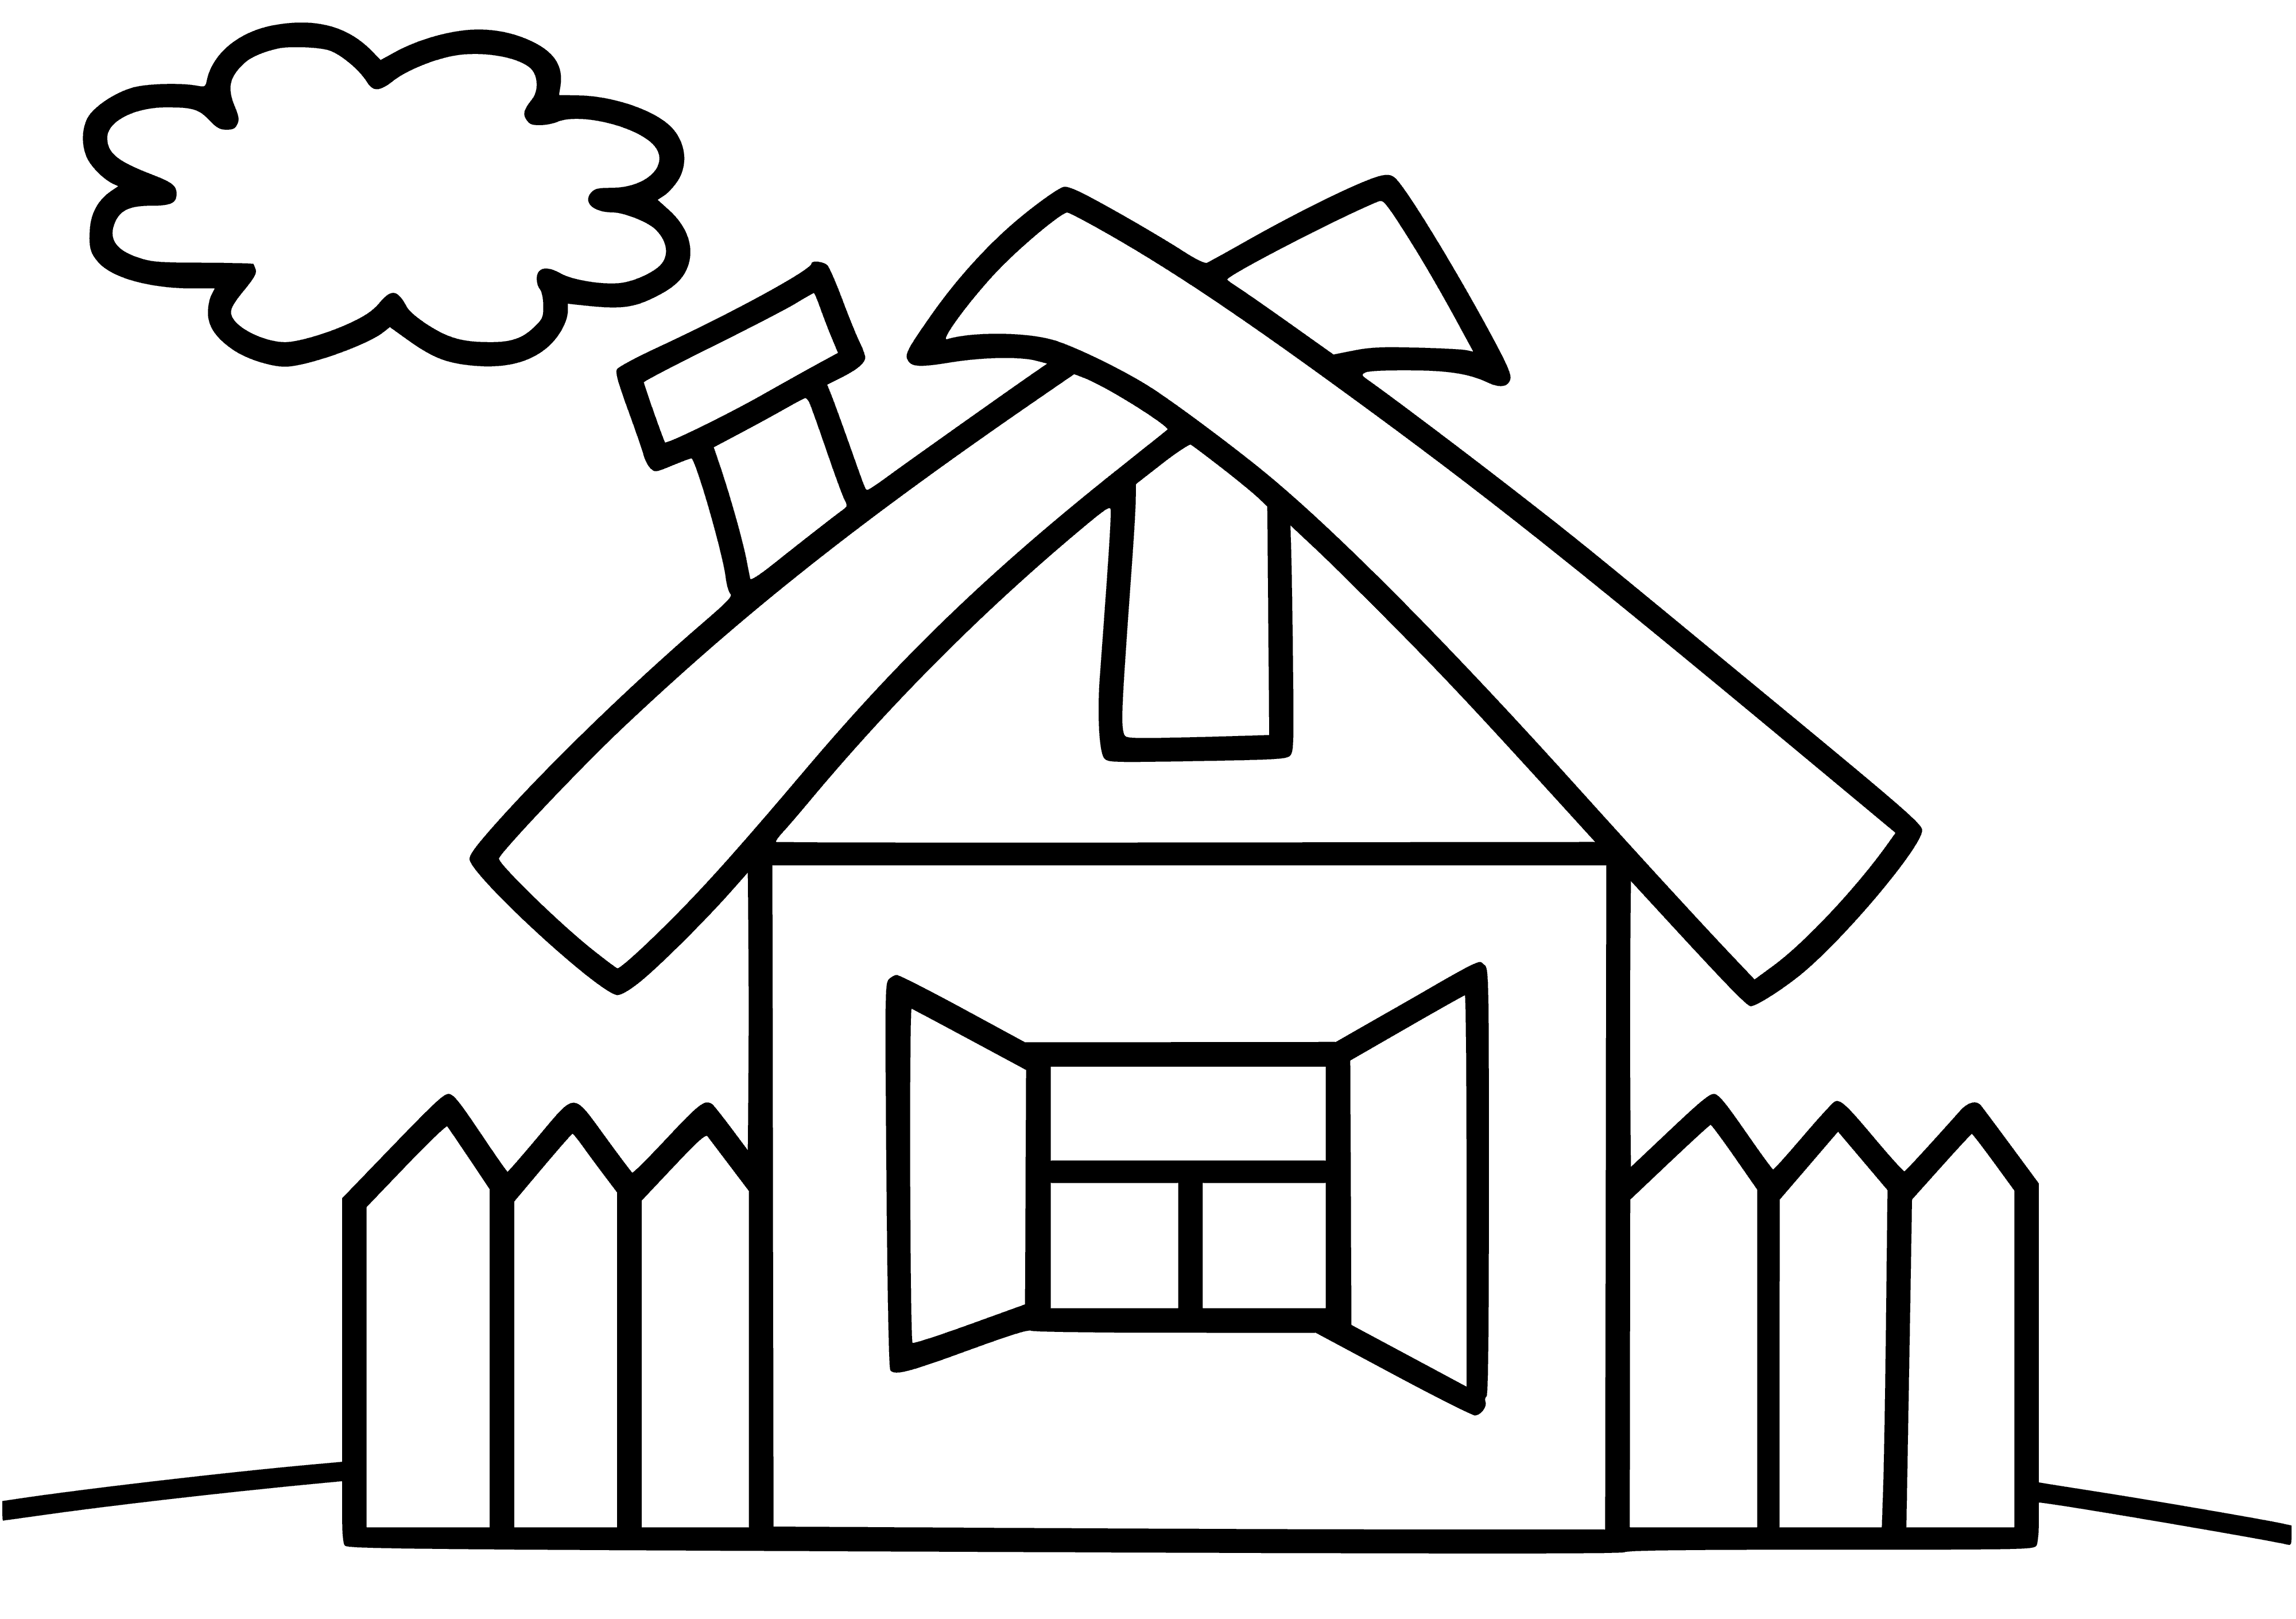 coloring page: A house in the center of the page with a red roof, yellow door, green windows, and a brown chimney.